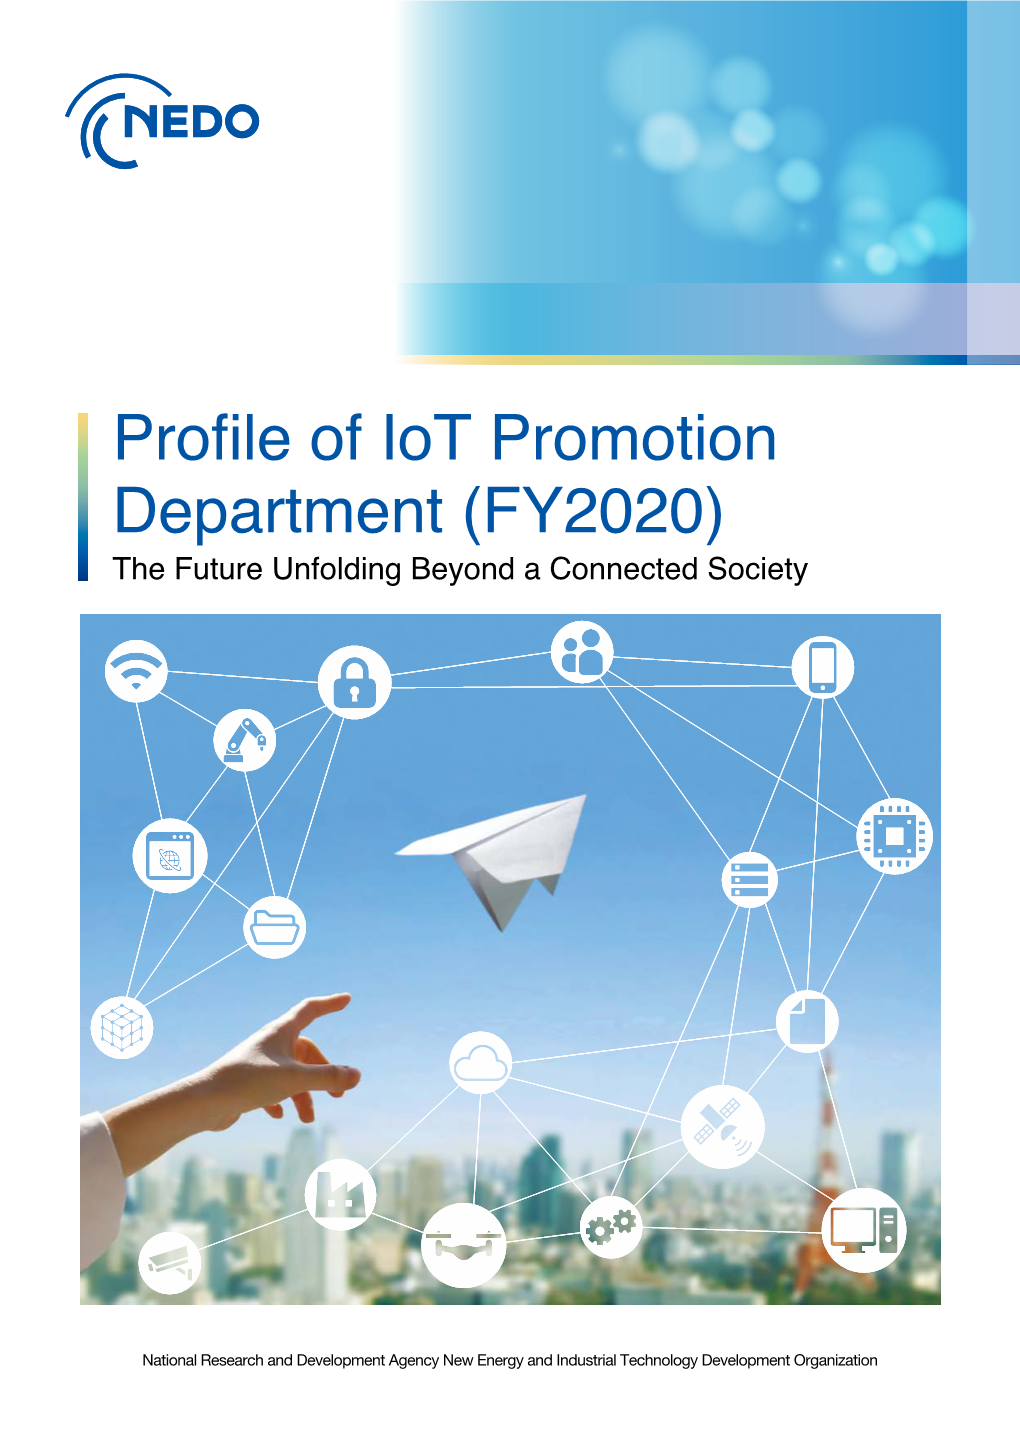 Profile of Iot Promotion Department (FY2020) the Future Unfolding Beyond a Connected Society